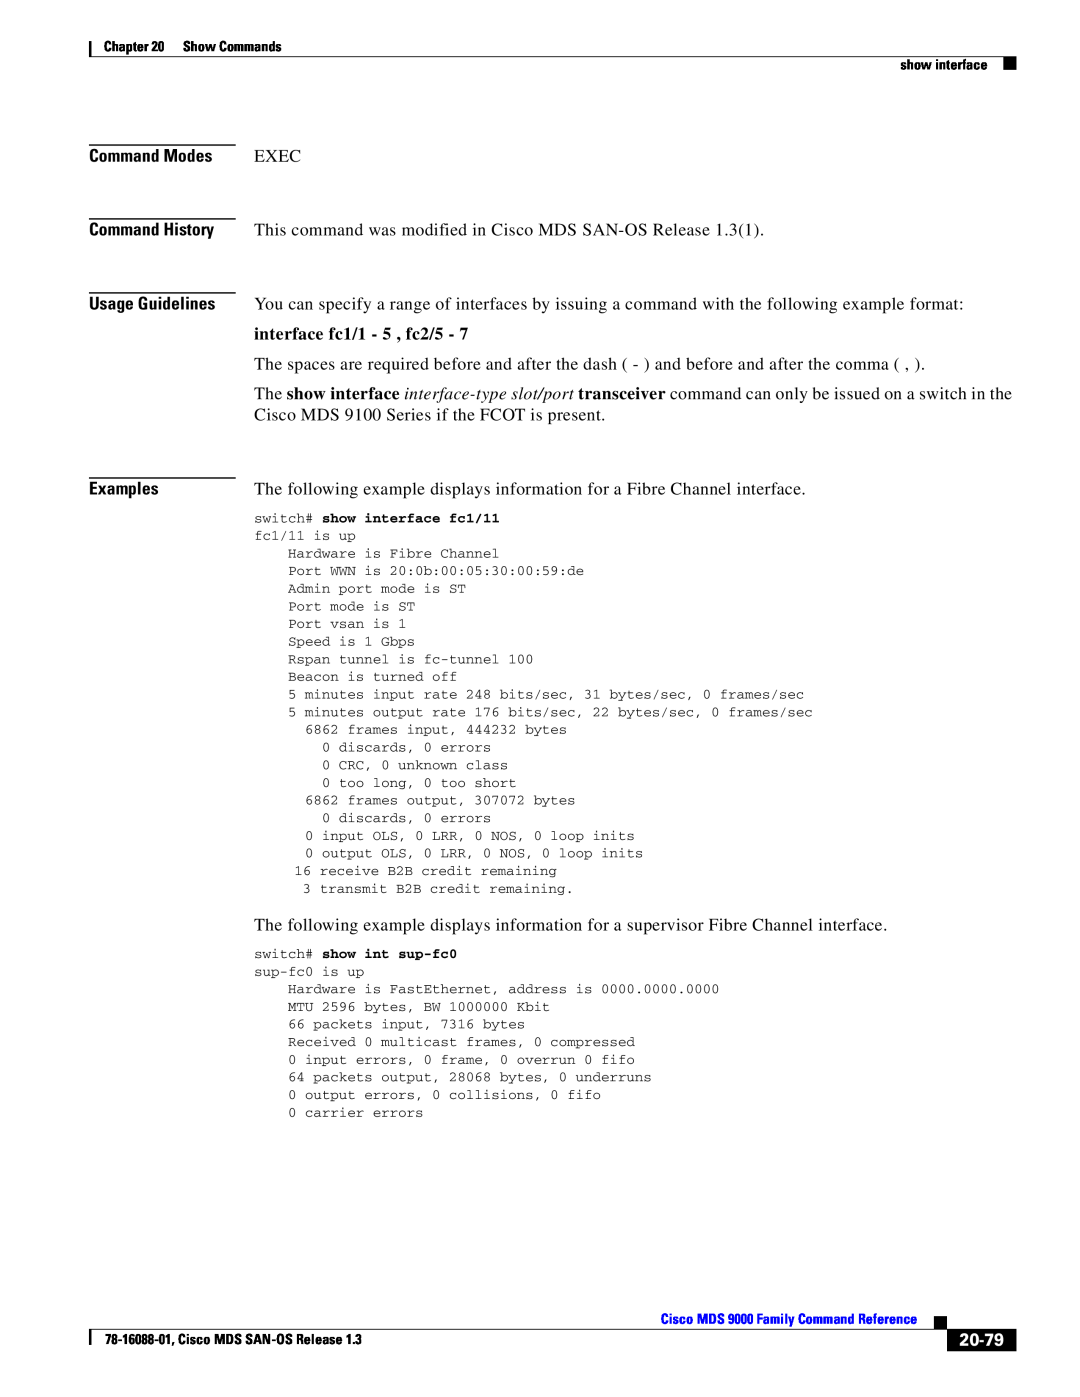 Cisco Systems MDS 9000 manual Command Modes Command History Usage Guidelines Examples, interface fc1/1 - 5 , fc2/5, 20-79 